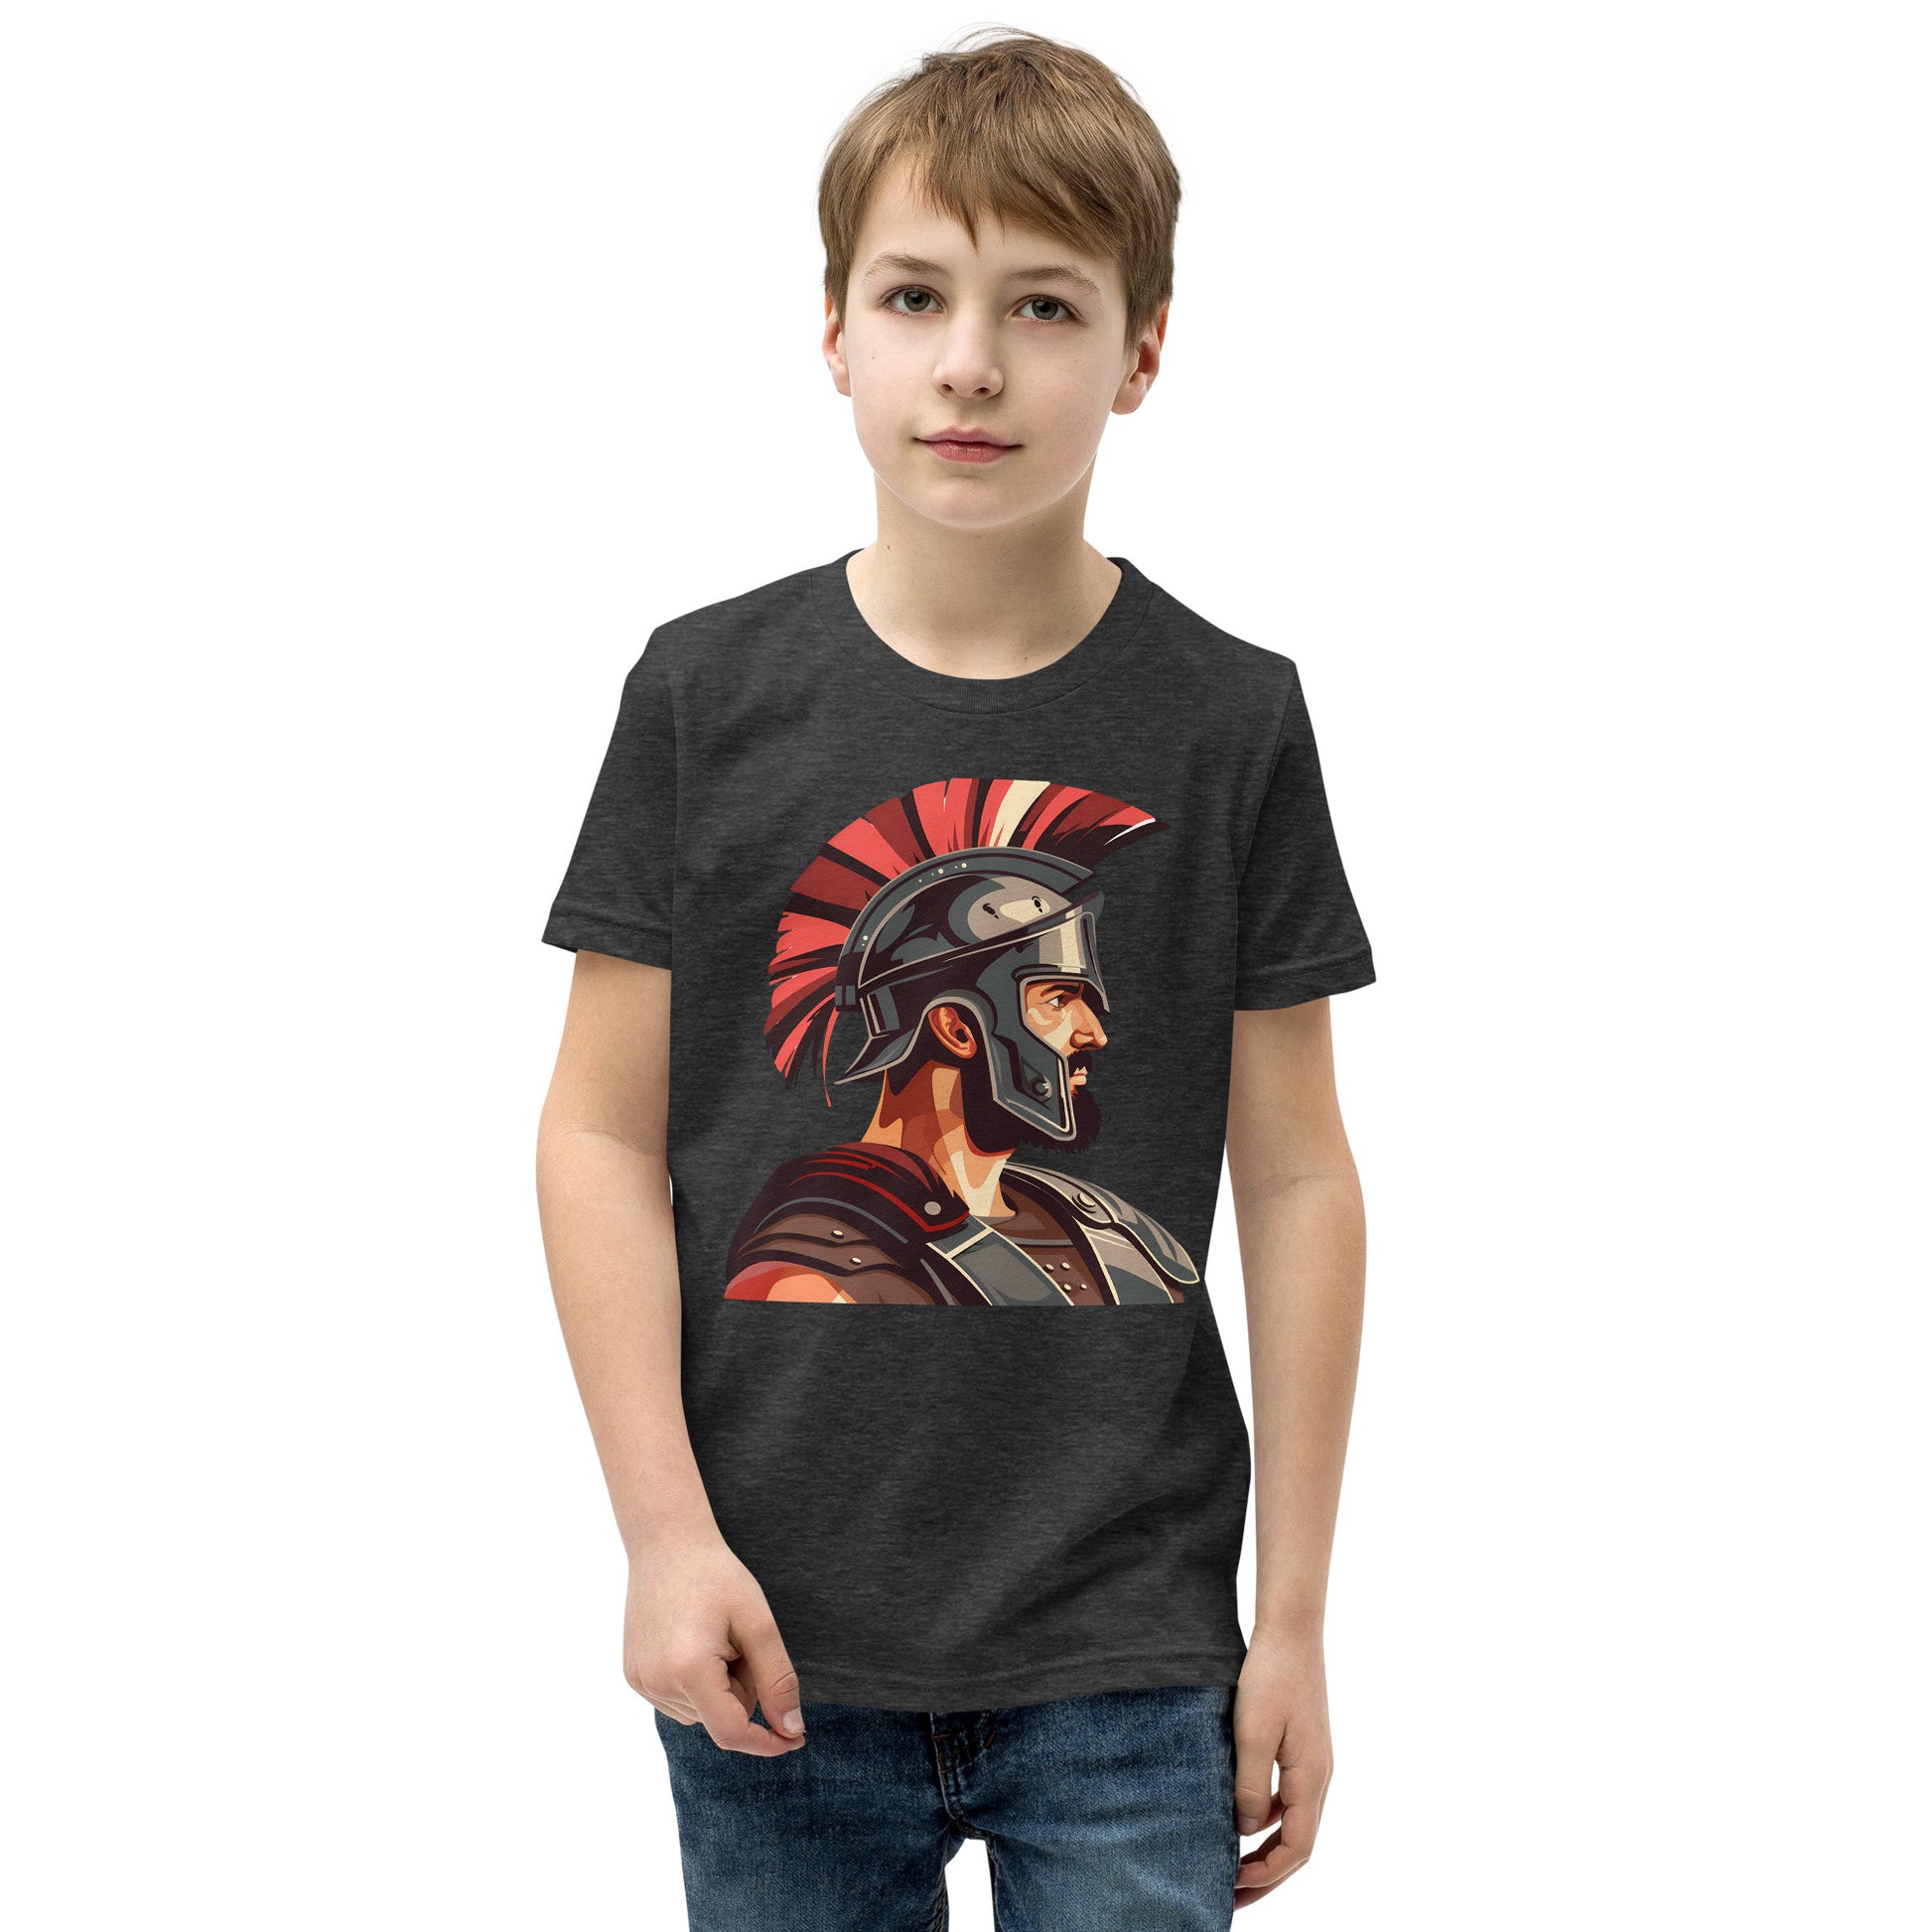 Teenager with a dark grey T-shirt with a print of a warrior